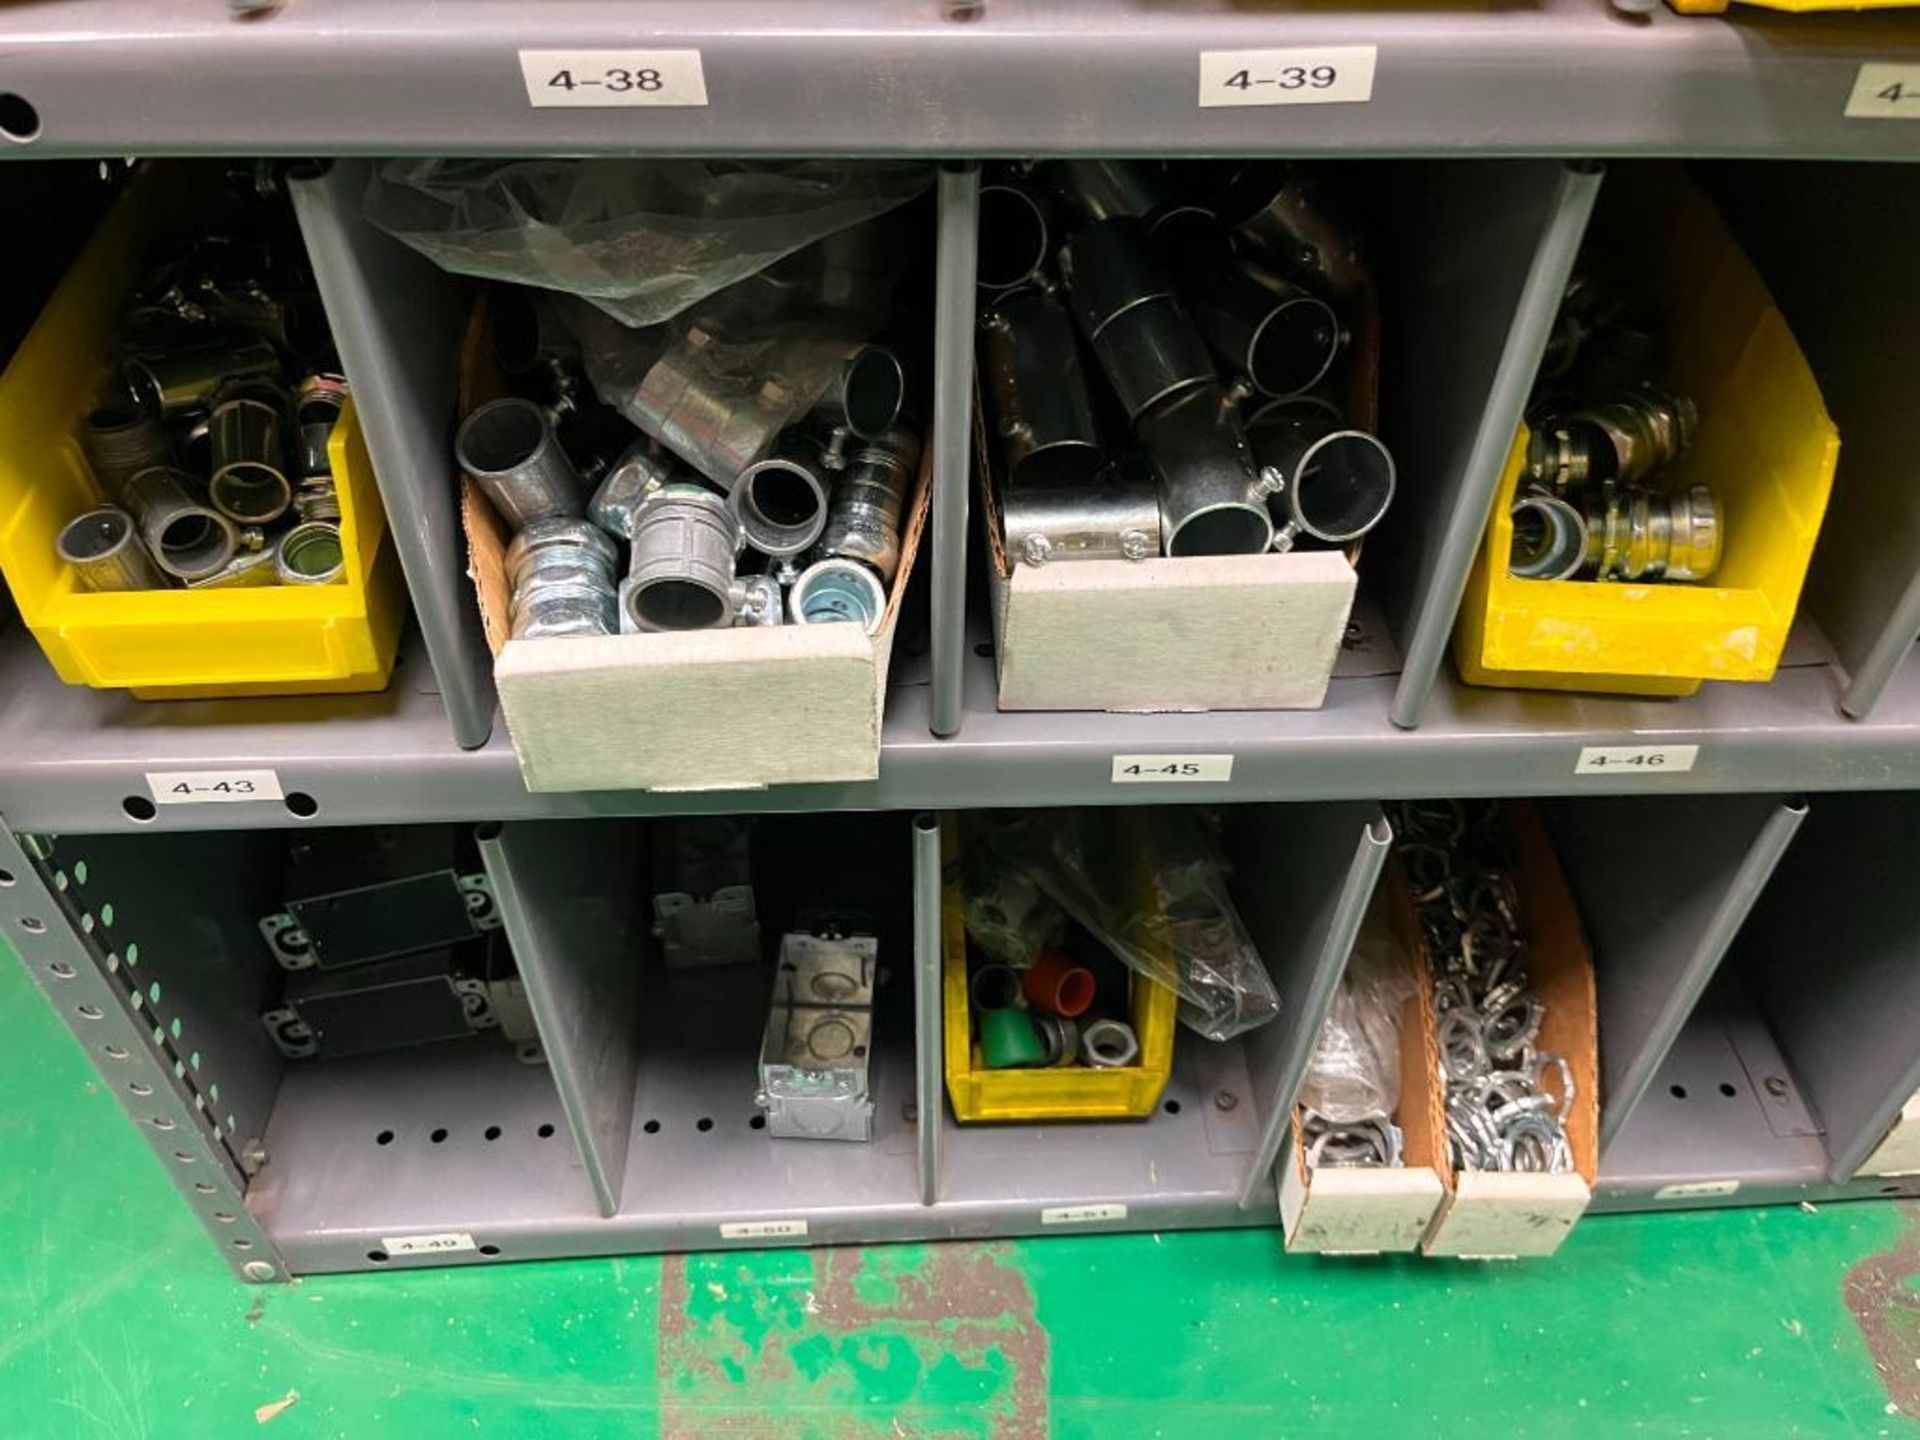 Contents of Maintenance Repair Room; Electrical Wire, Fittings, Chain, Breakers, Relays, Plug Ends, - Image 21 of 65